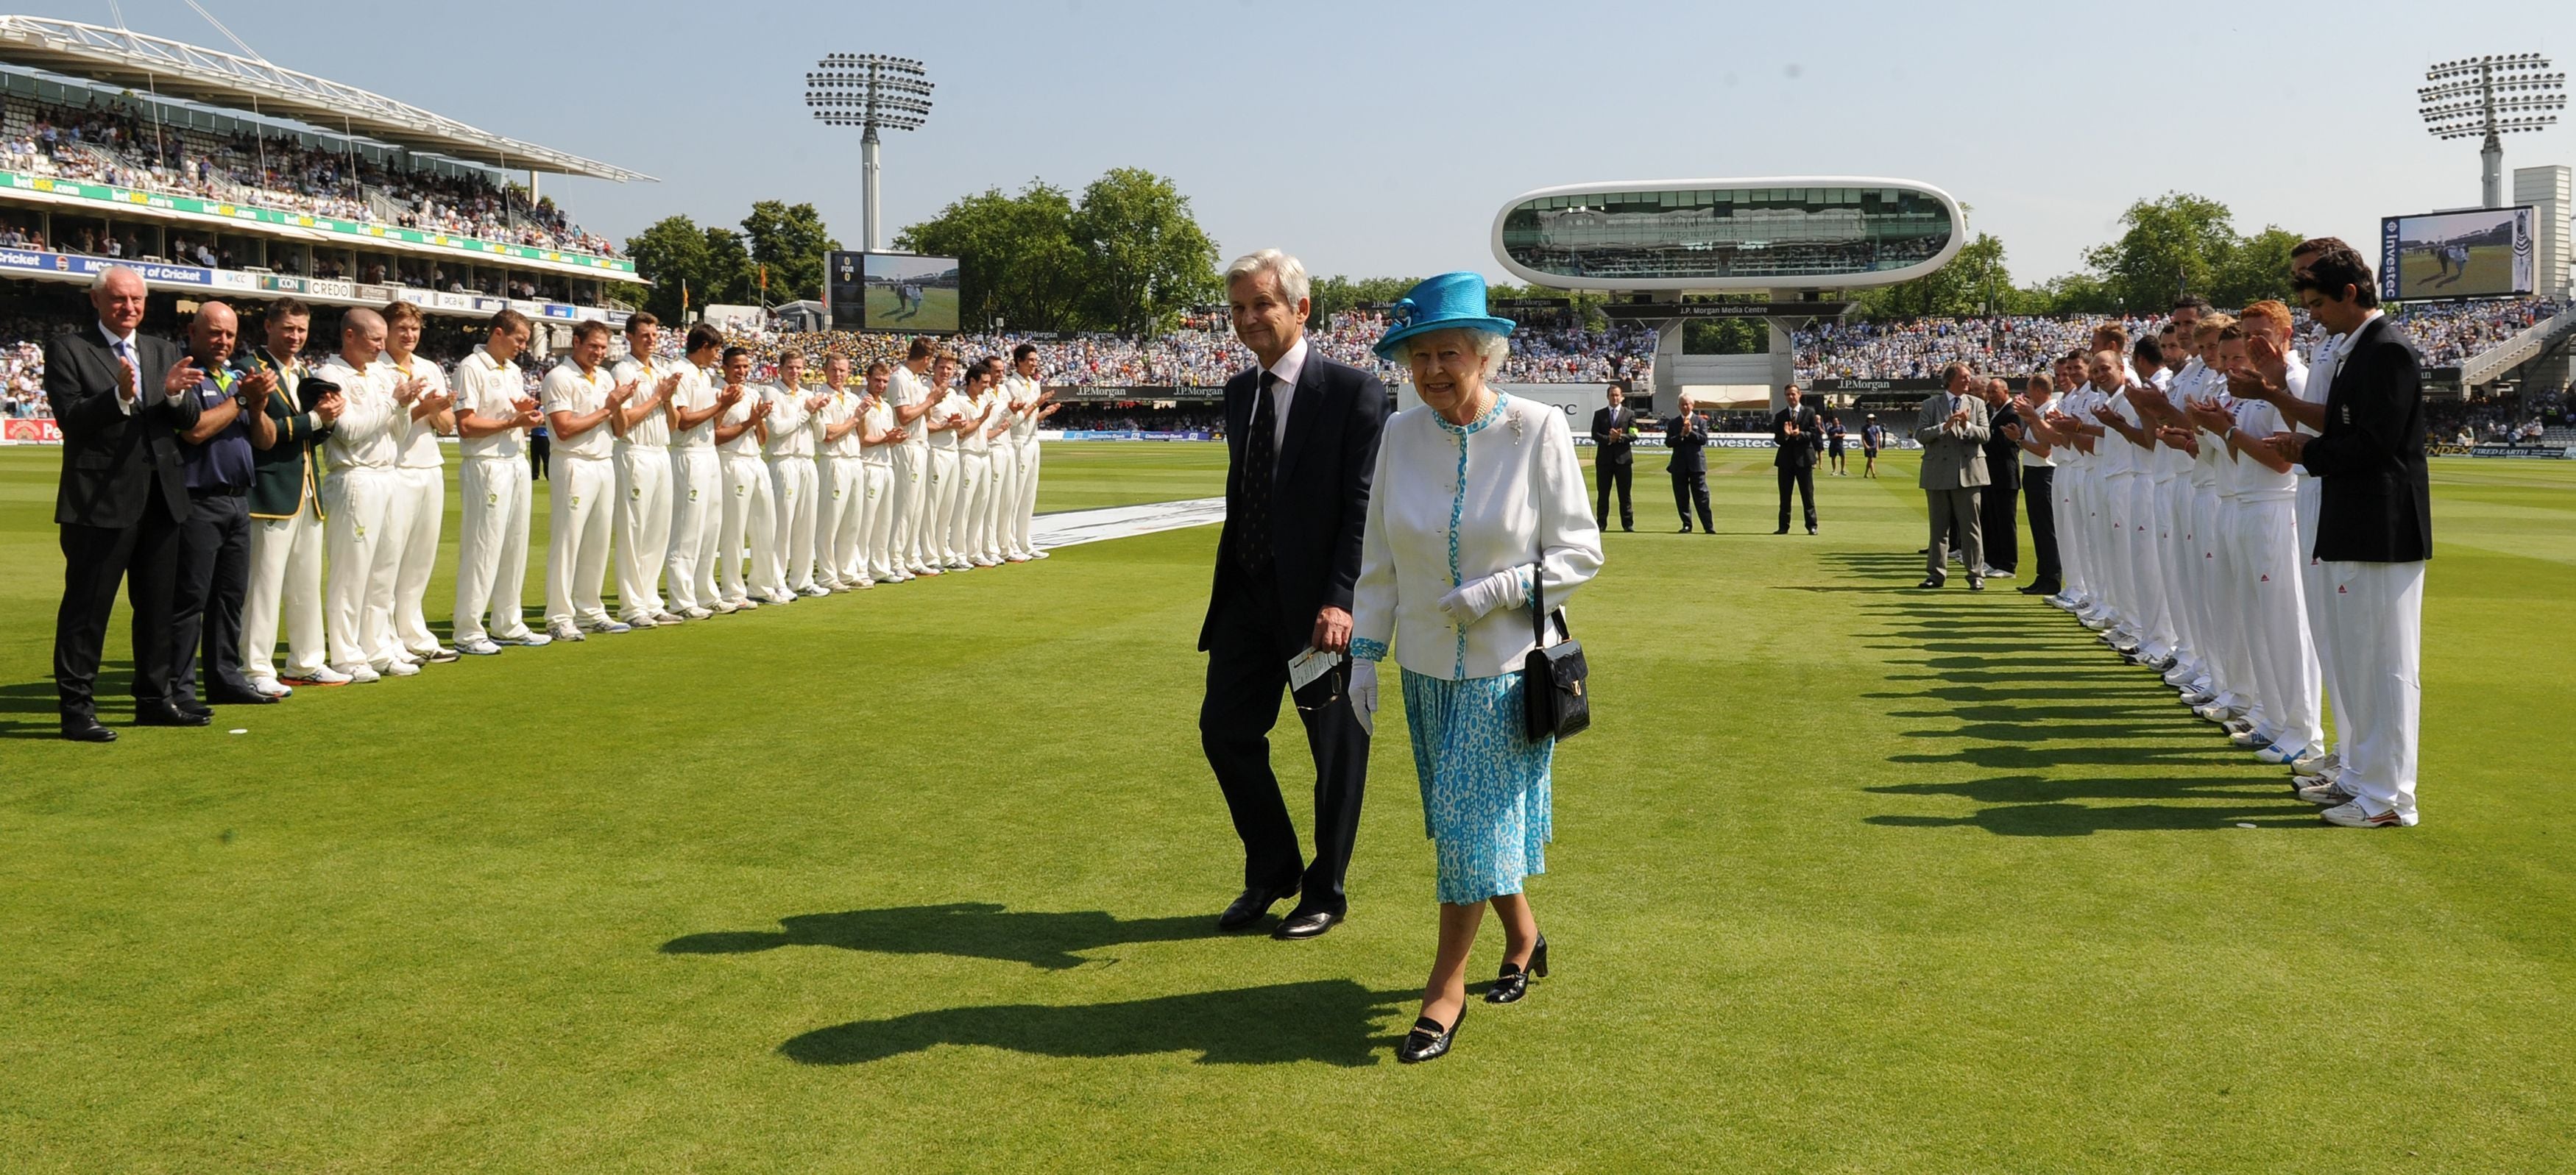 The Queen made several trips to see England play (Anthony Devlin/PA)